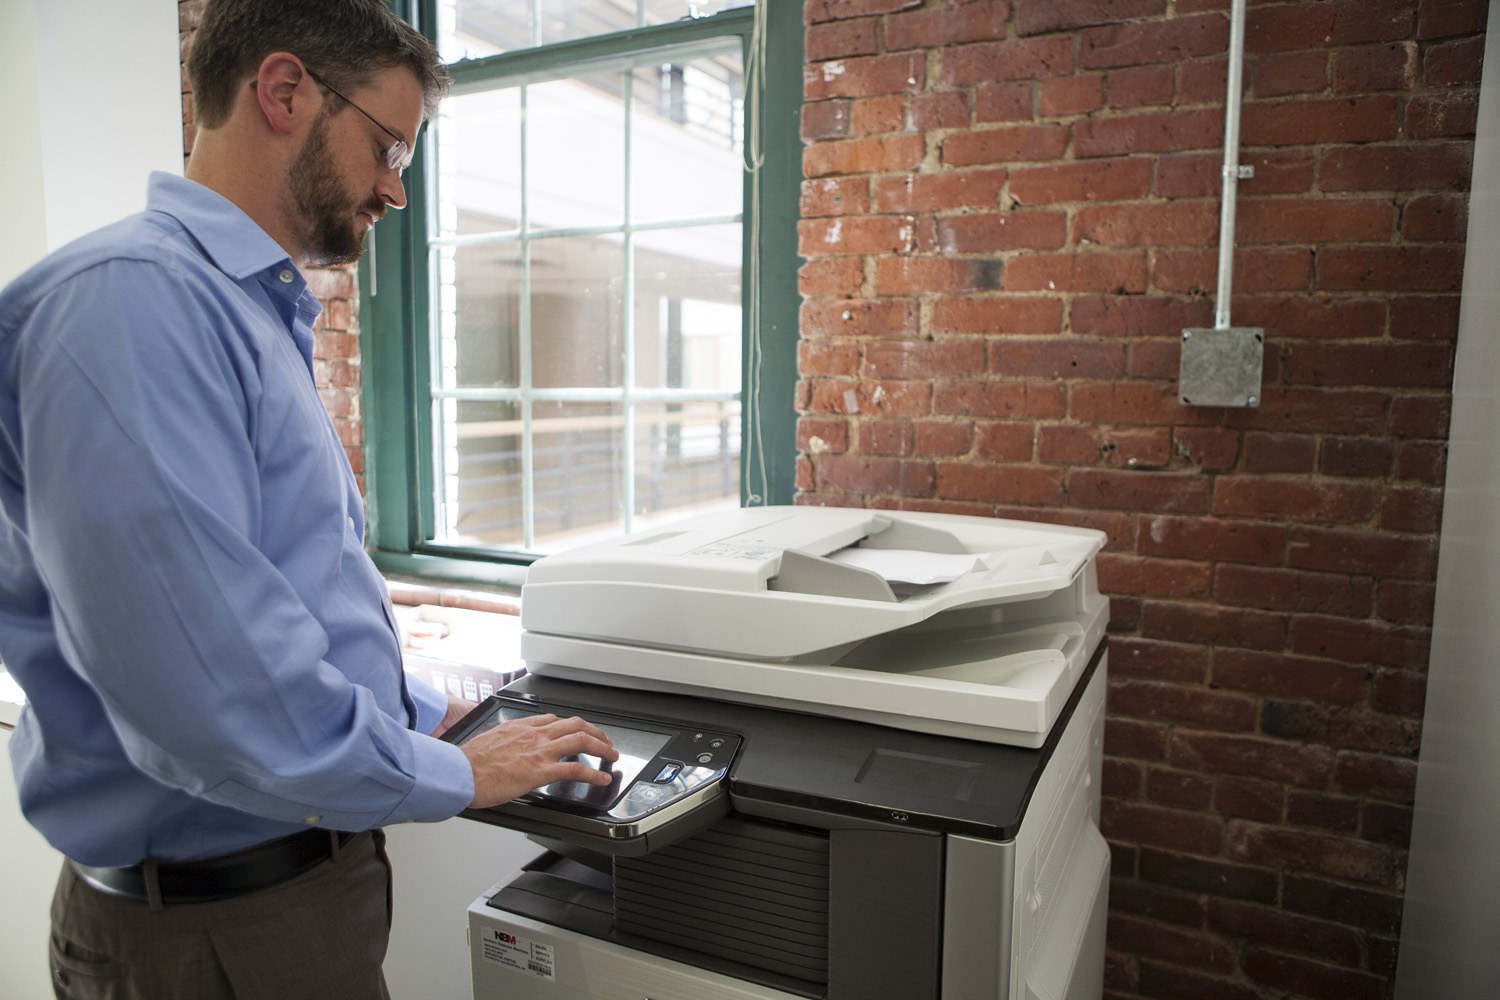 What Causes Streaks On A Copier? 